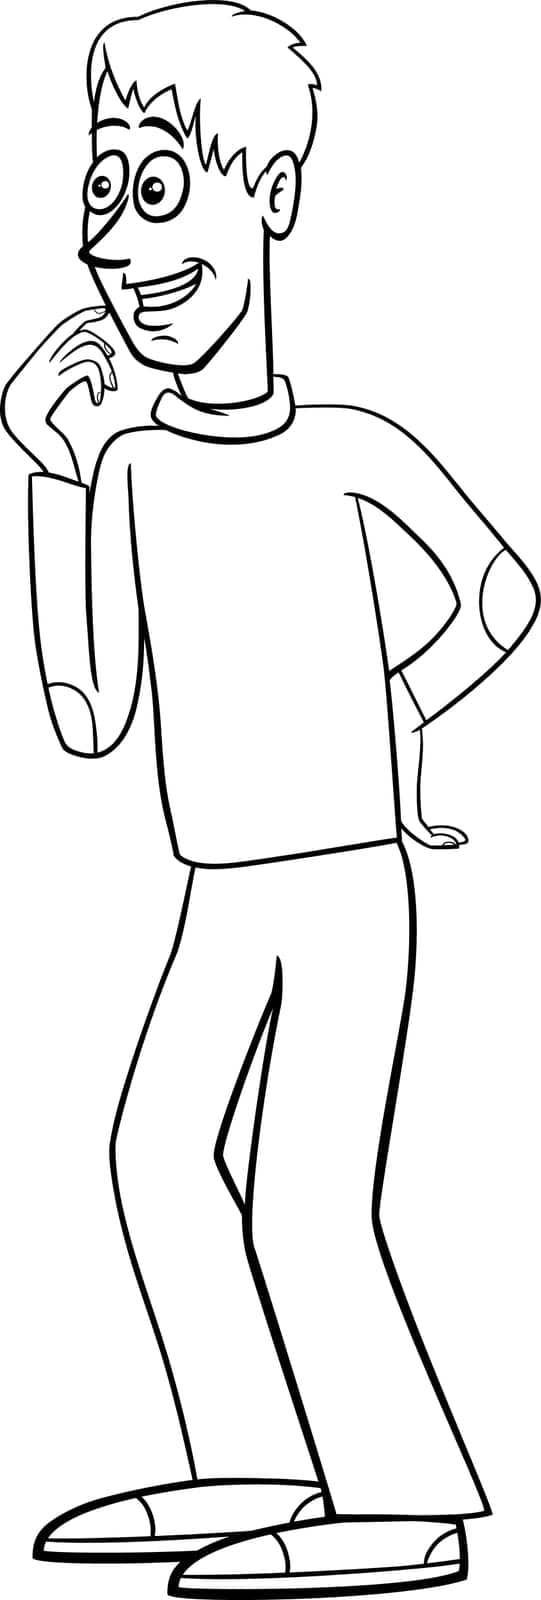 Cartoon illustration of funny young man or guy comic character coloring page